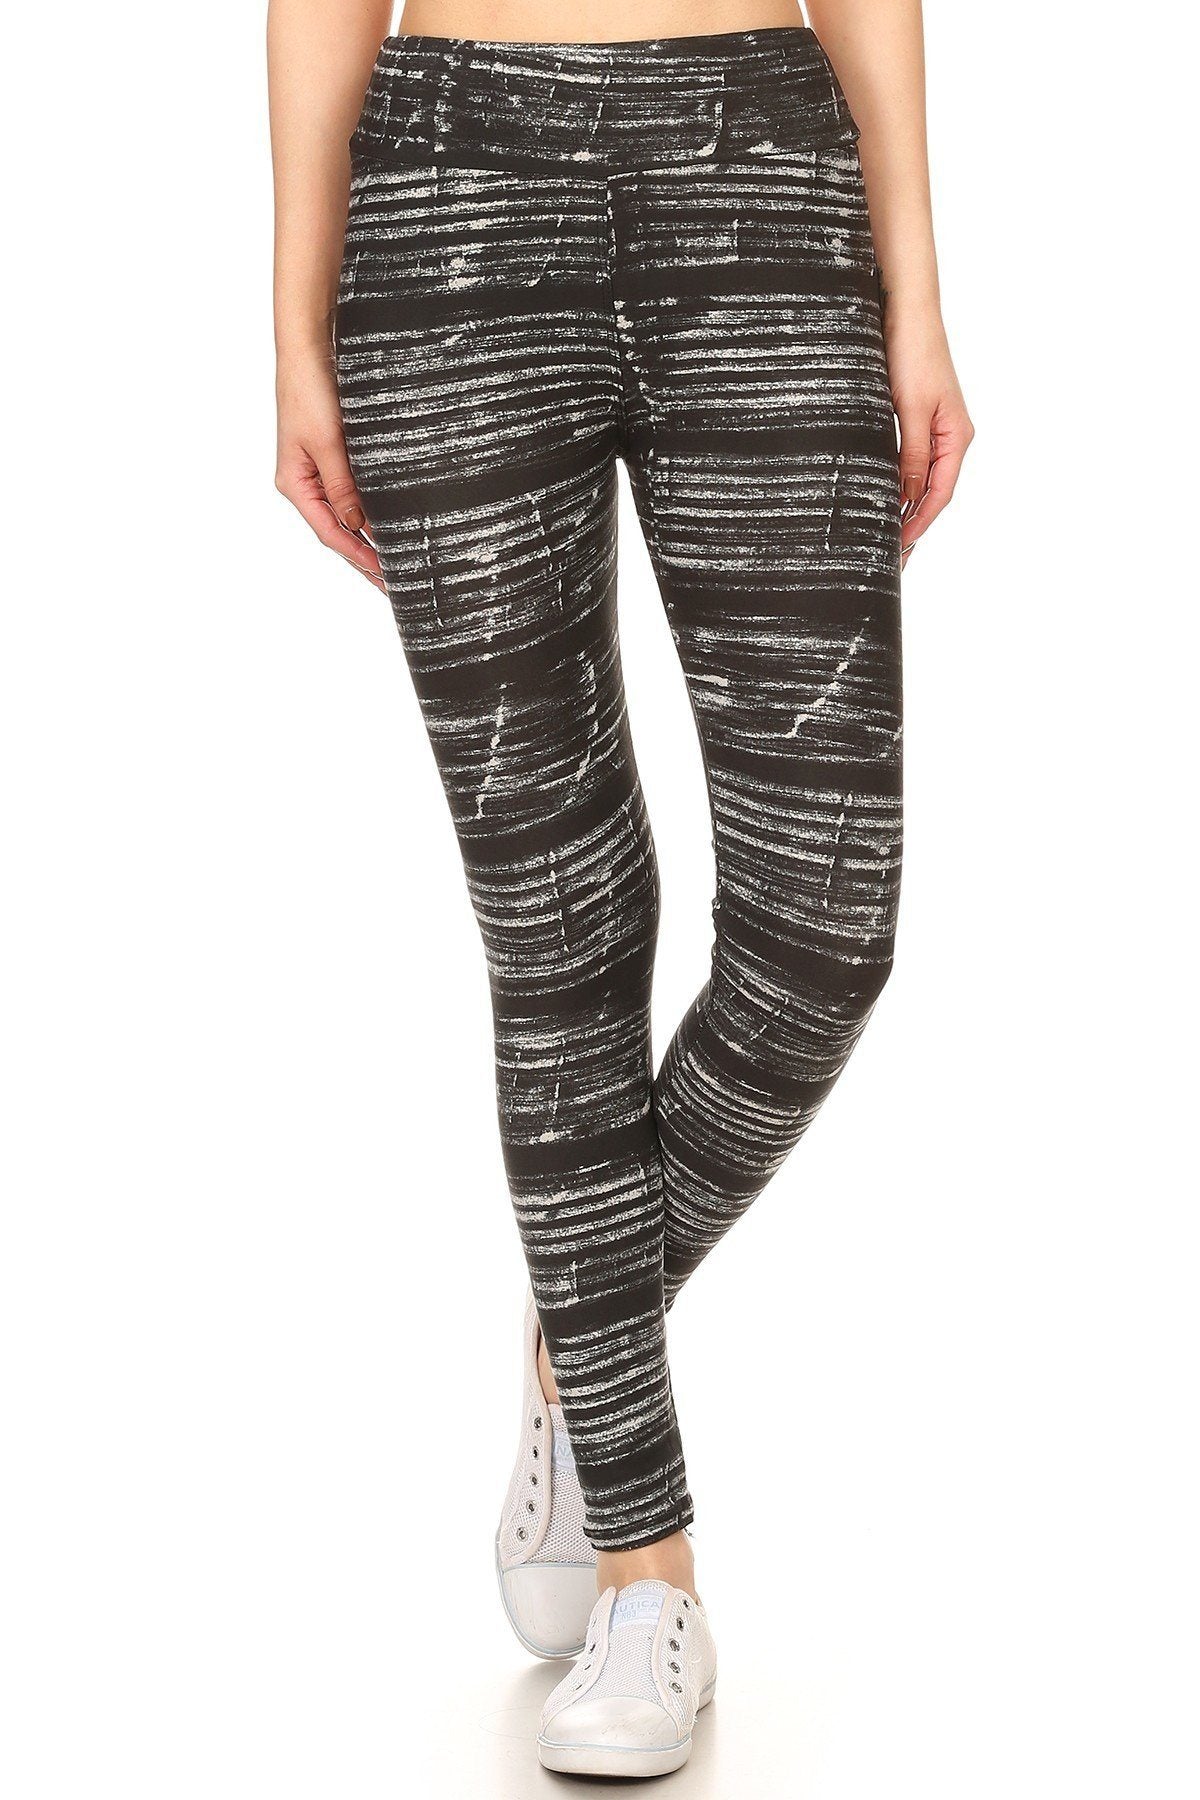 Yoga Style Banded Lined Multicolor Print, Full Length Leggings In A Slim Fitting Style With A Banded High Waist Sunny EvE Fashion